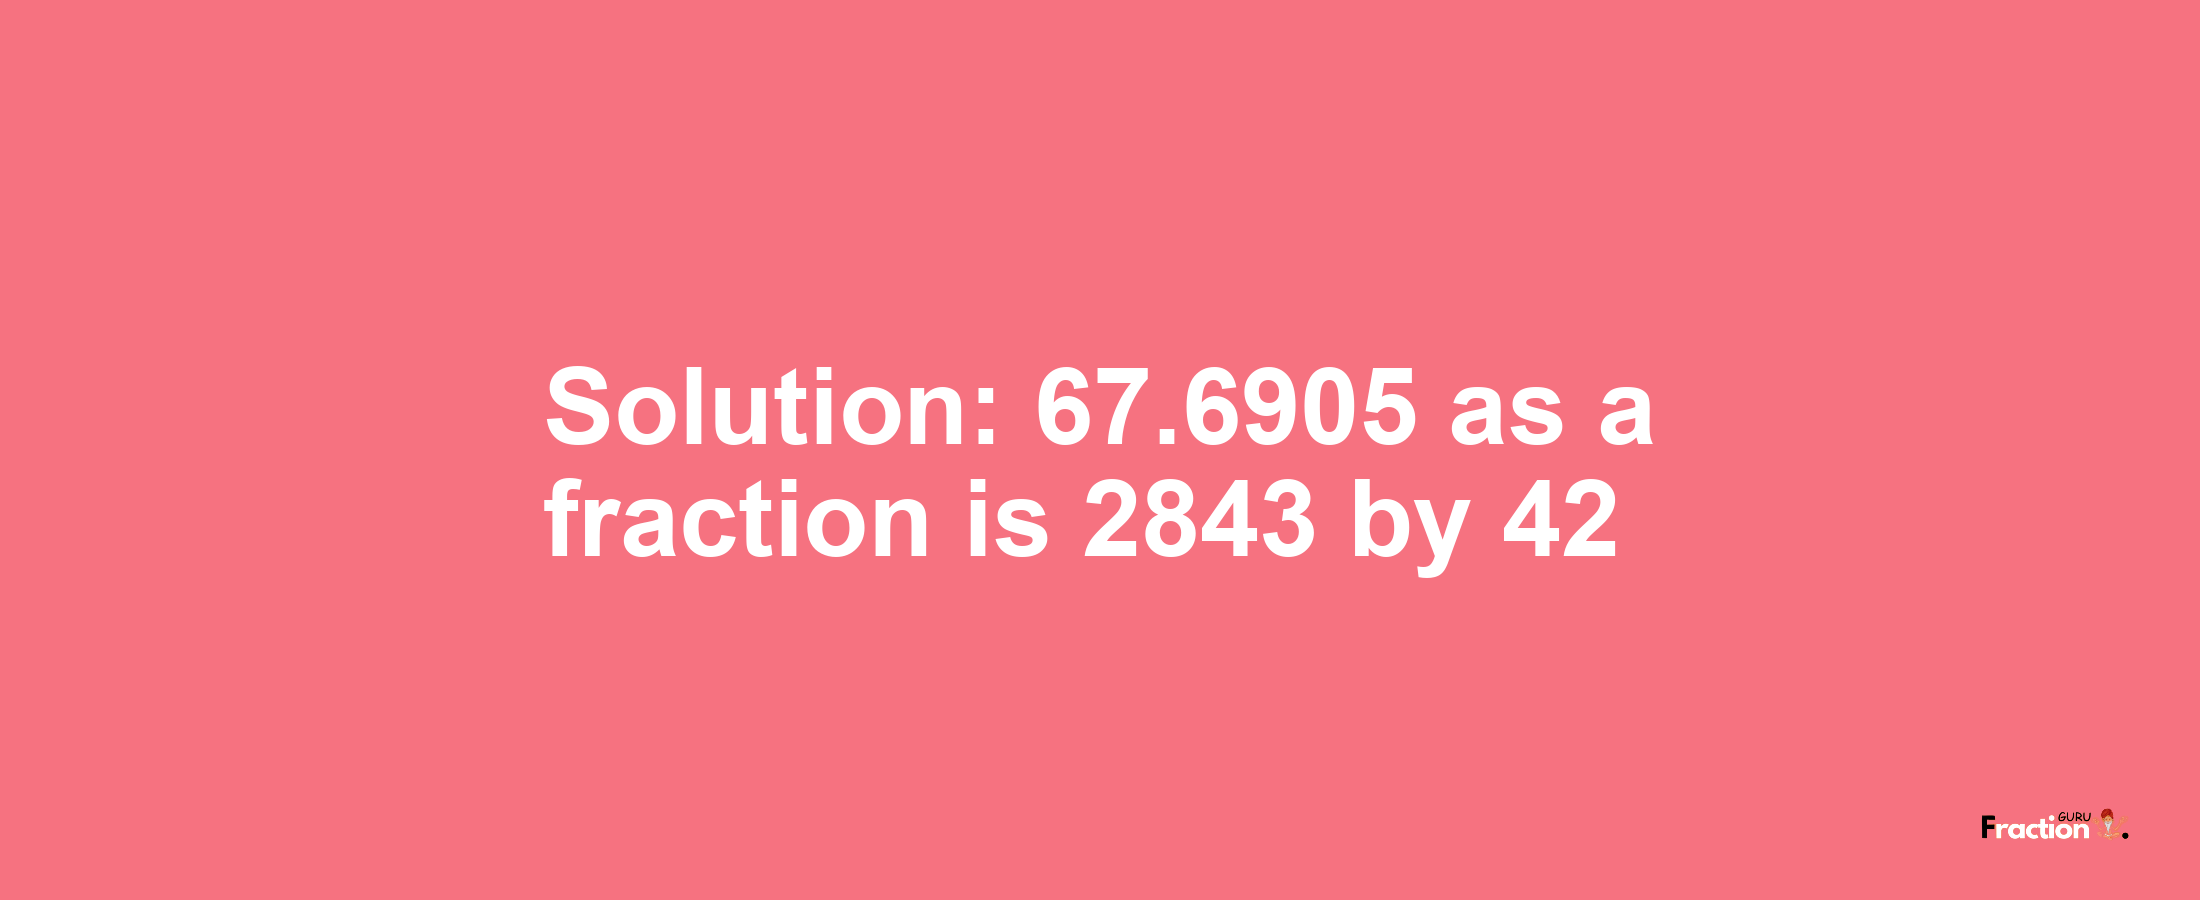 Solution:67.6905 as a fraction is 2843/42